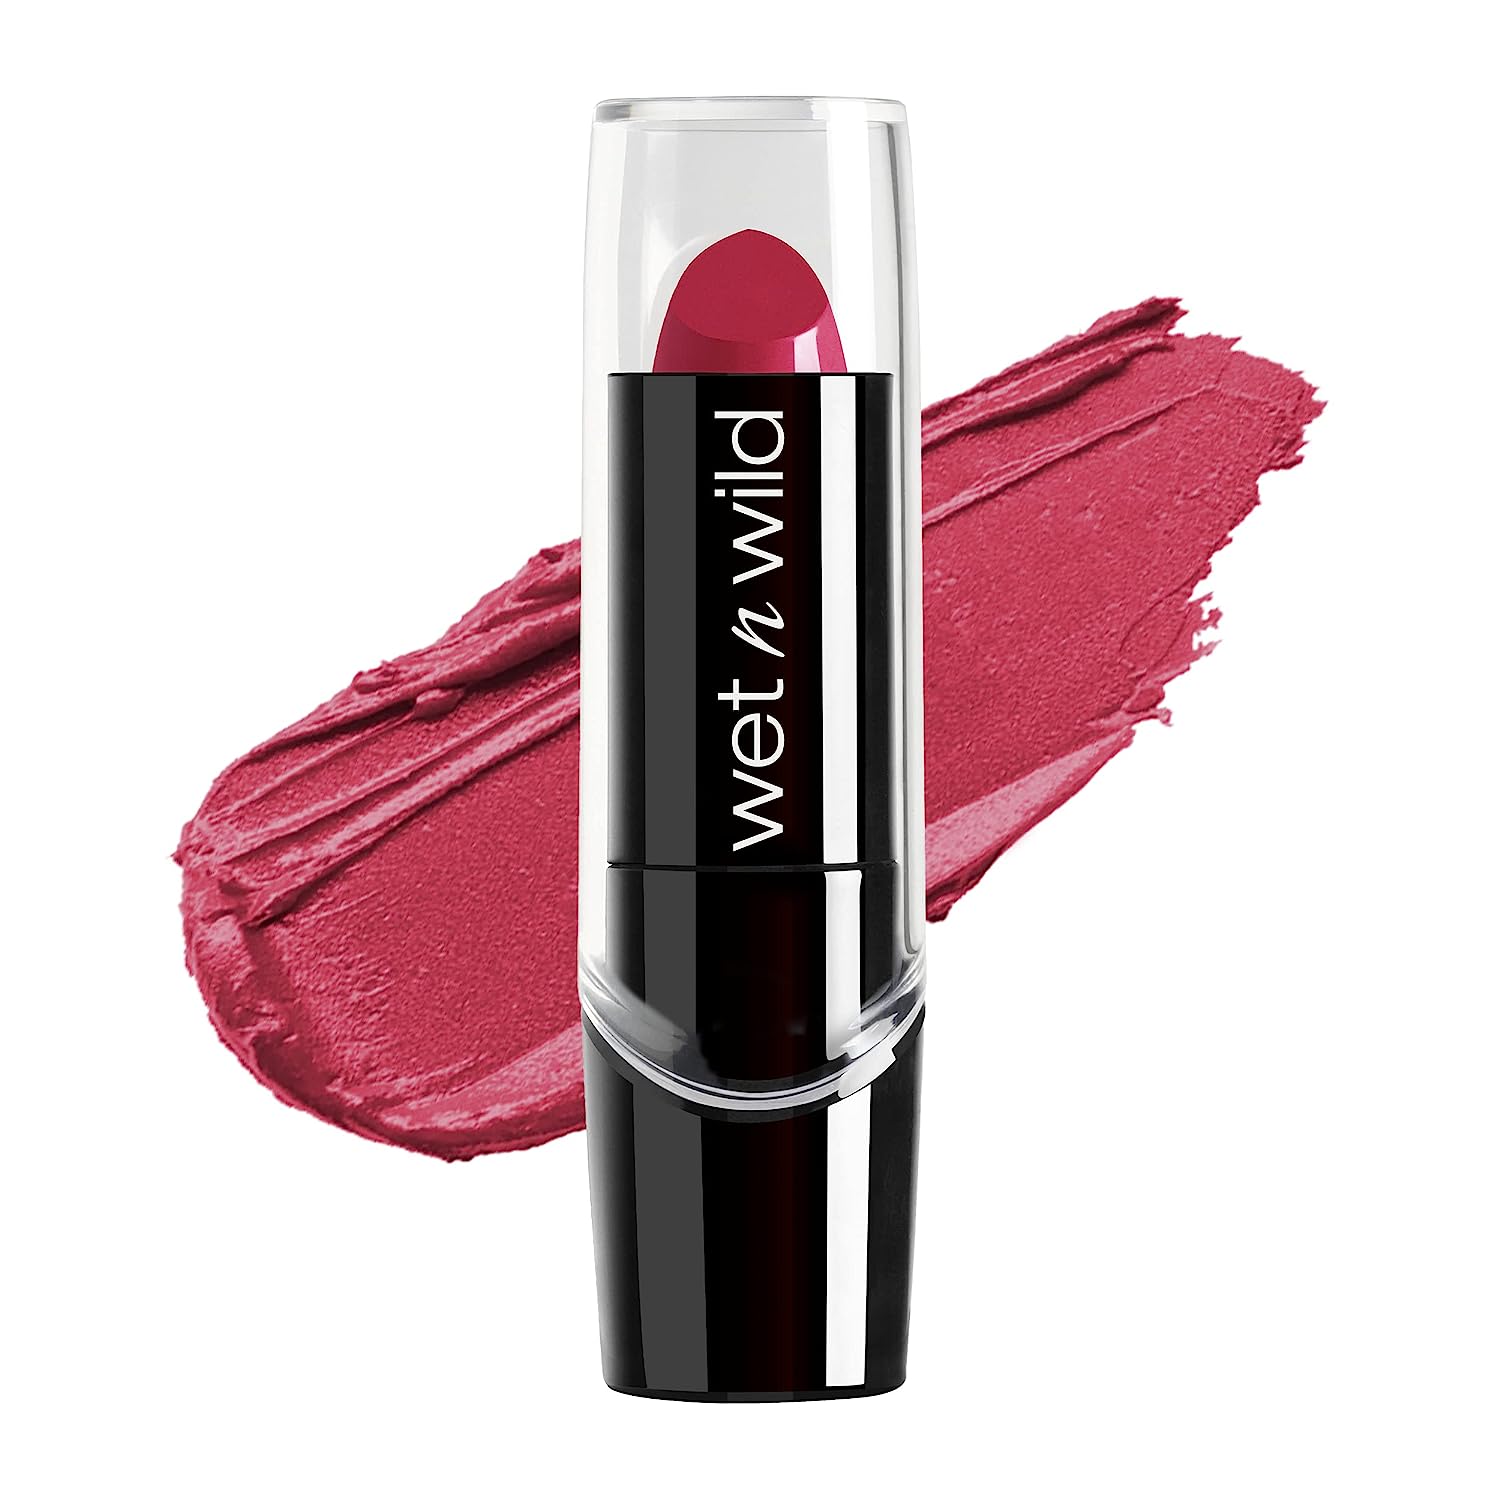 Amazon.com : wet n wild Silk Finish Lipstick| Hydrating Lip Color| Rich Buildable Color| In The Near Fuchsia Pink : Beauty & Personal Care